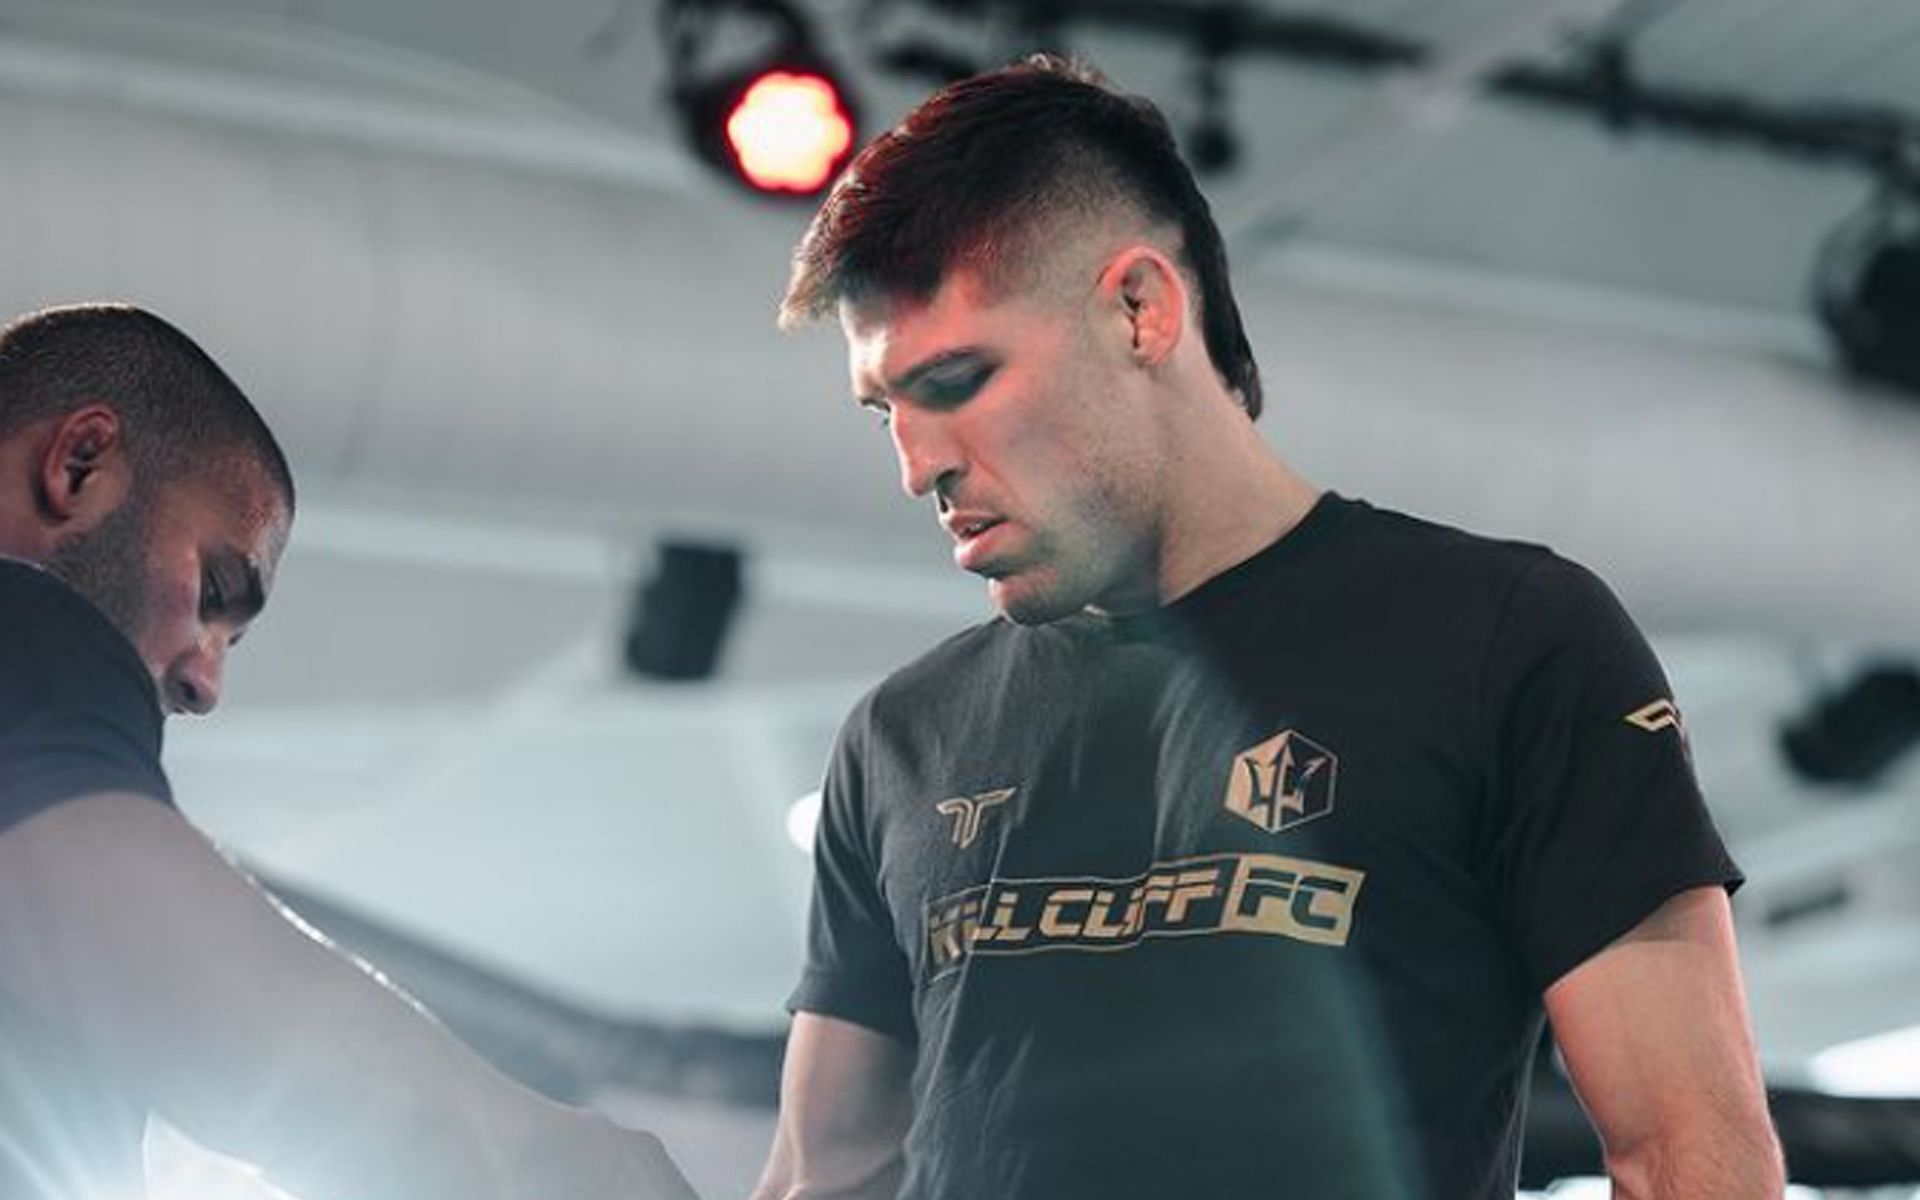 Vicente Luque is one of the most exciting fighters in the UFC welterweight division [Image Courtesy: @luquevicente Instagram]